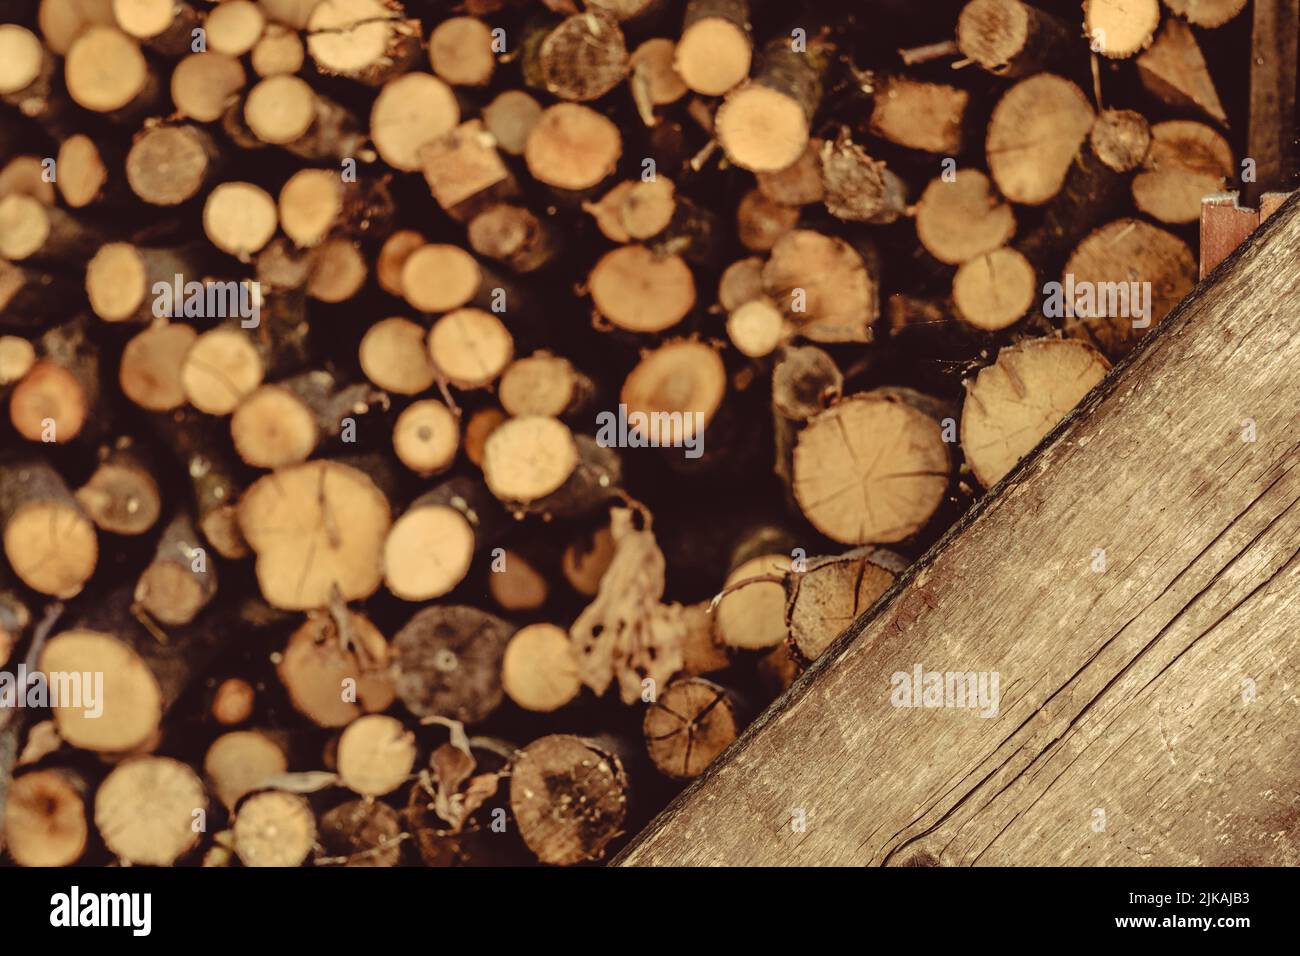 brown timber stock round wood logs background Stock Photo